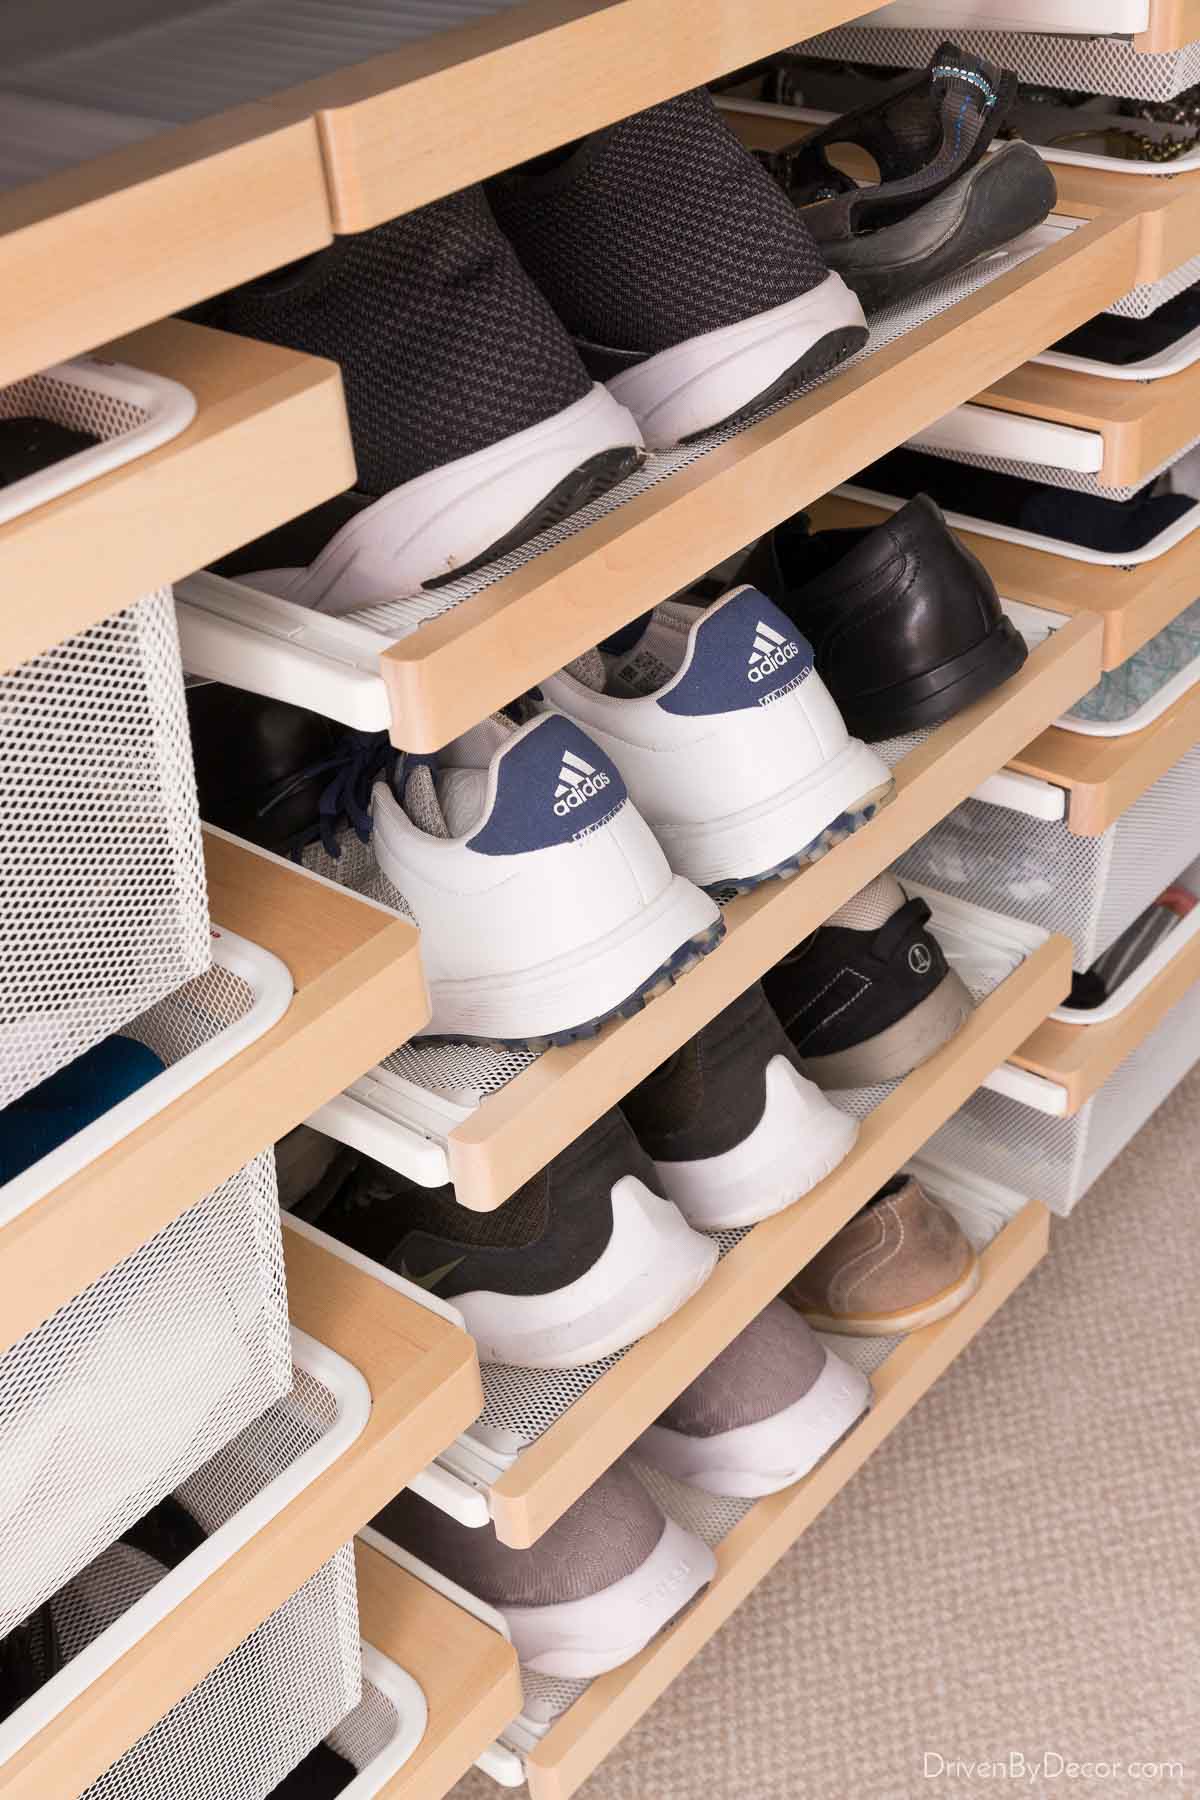 The Elfa pull-out shoe racks in our closet